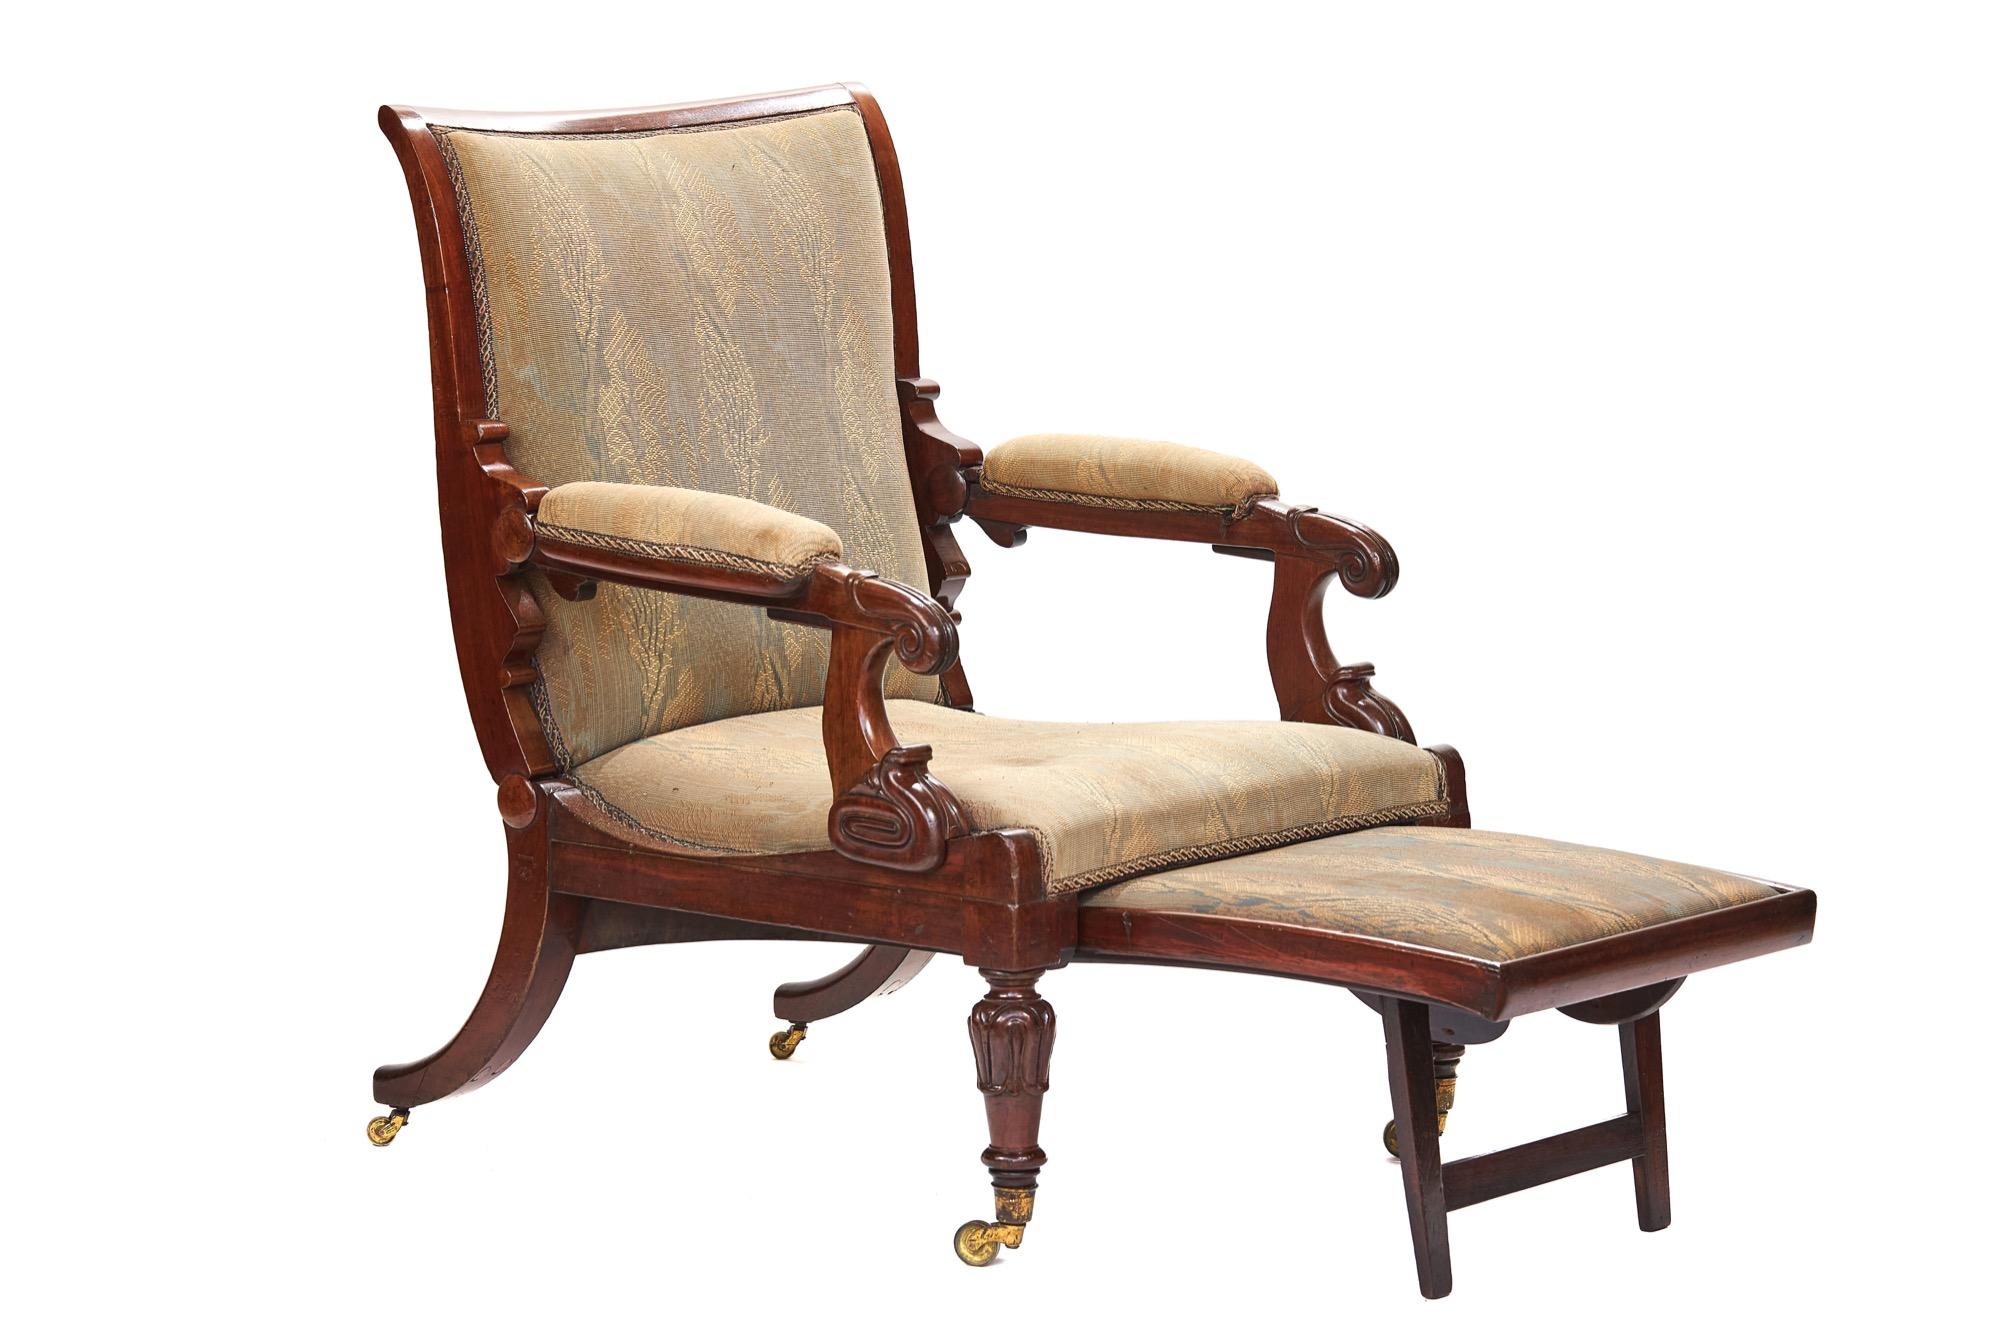 Fine G1V Mahogany Daws Patent improved Recumbent chair circa 1830,
This improved Recumbent chair was patented by Daws circa 1830, 
Described :
[ by elevating a spring beneath the arm of the chair. Where the hand rests, 
it may be converted into